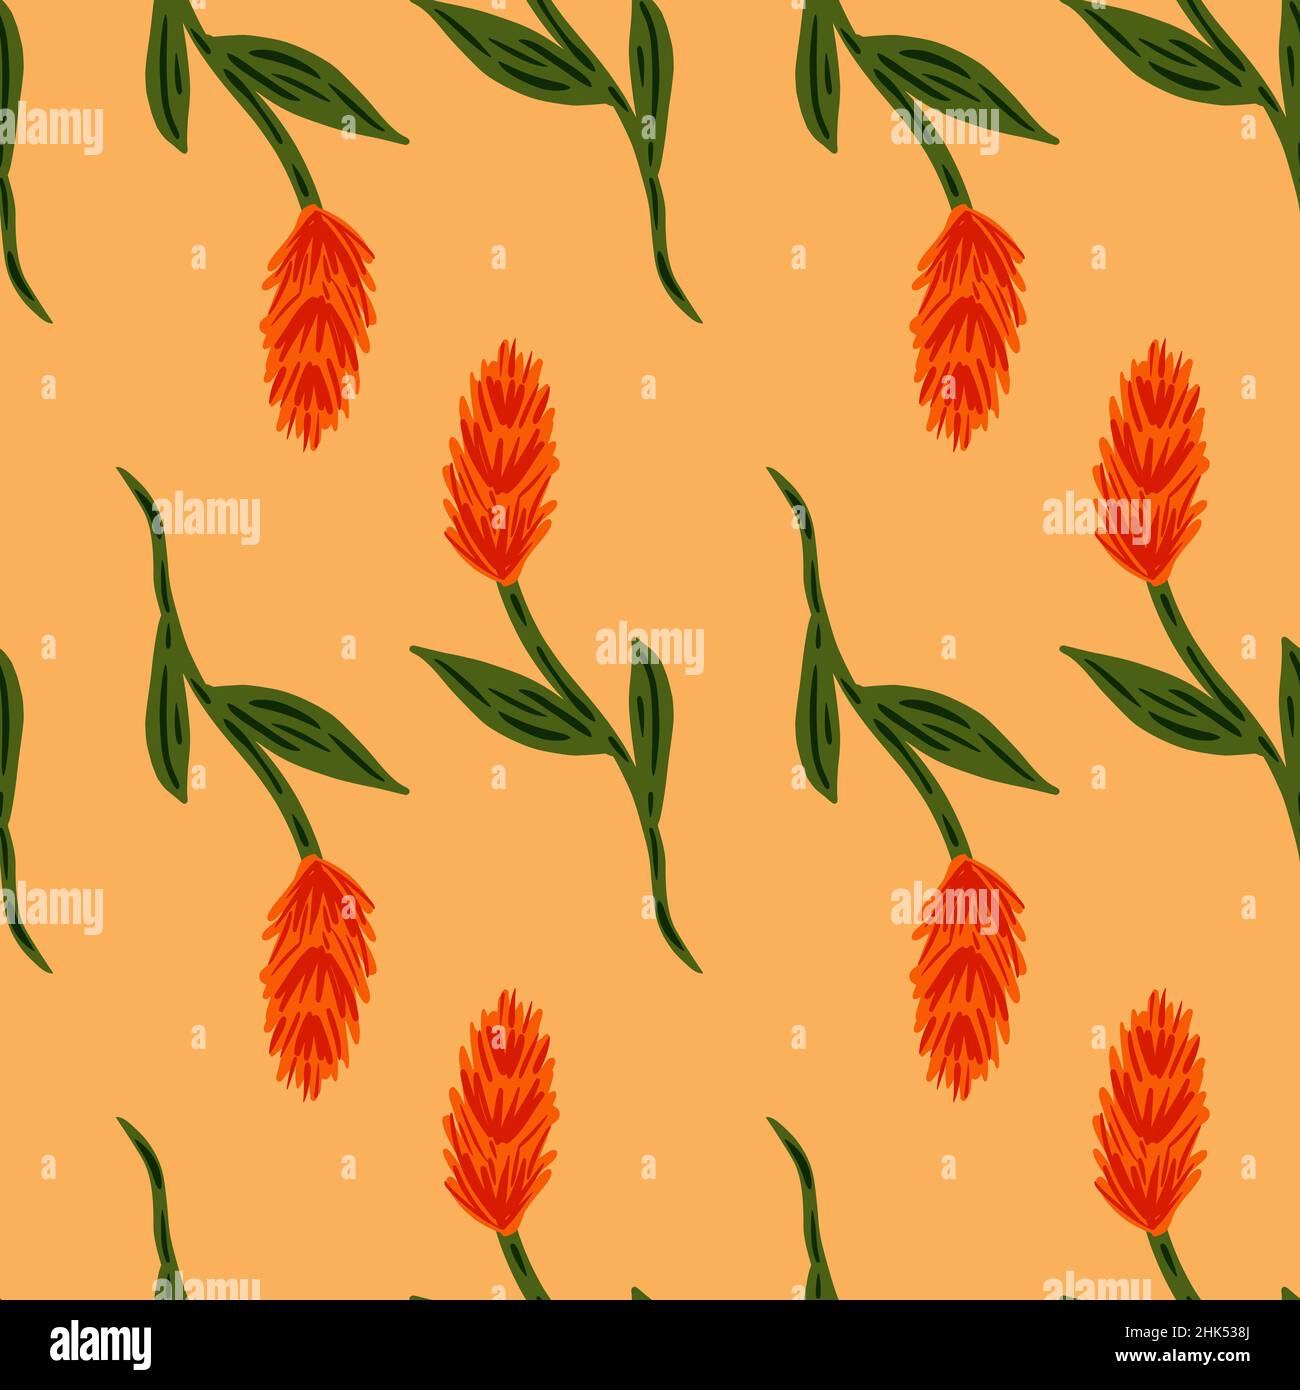 Simple style seamless farm pattern with red doodle ear of wheat ornament. Light pastel orange background. Graphic design for wrapping paper and fabric Stock Vector